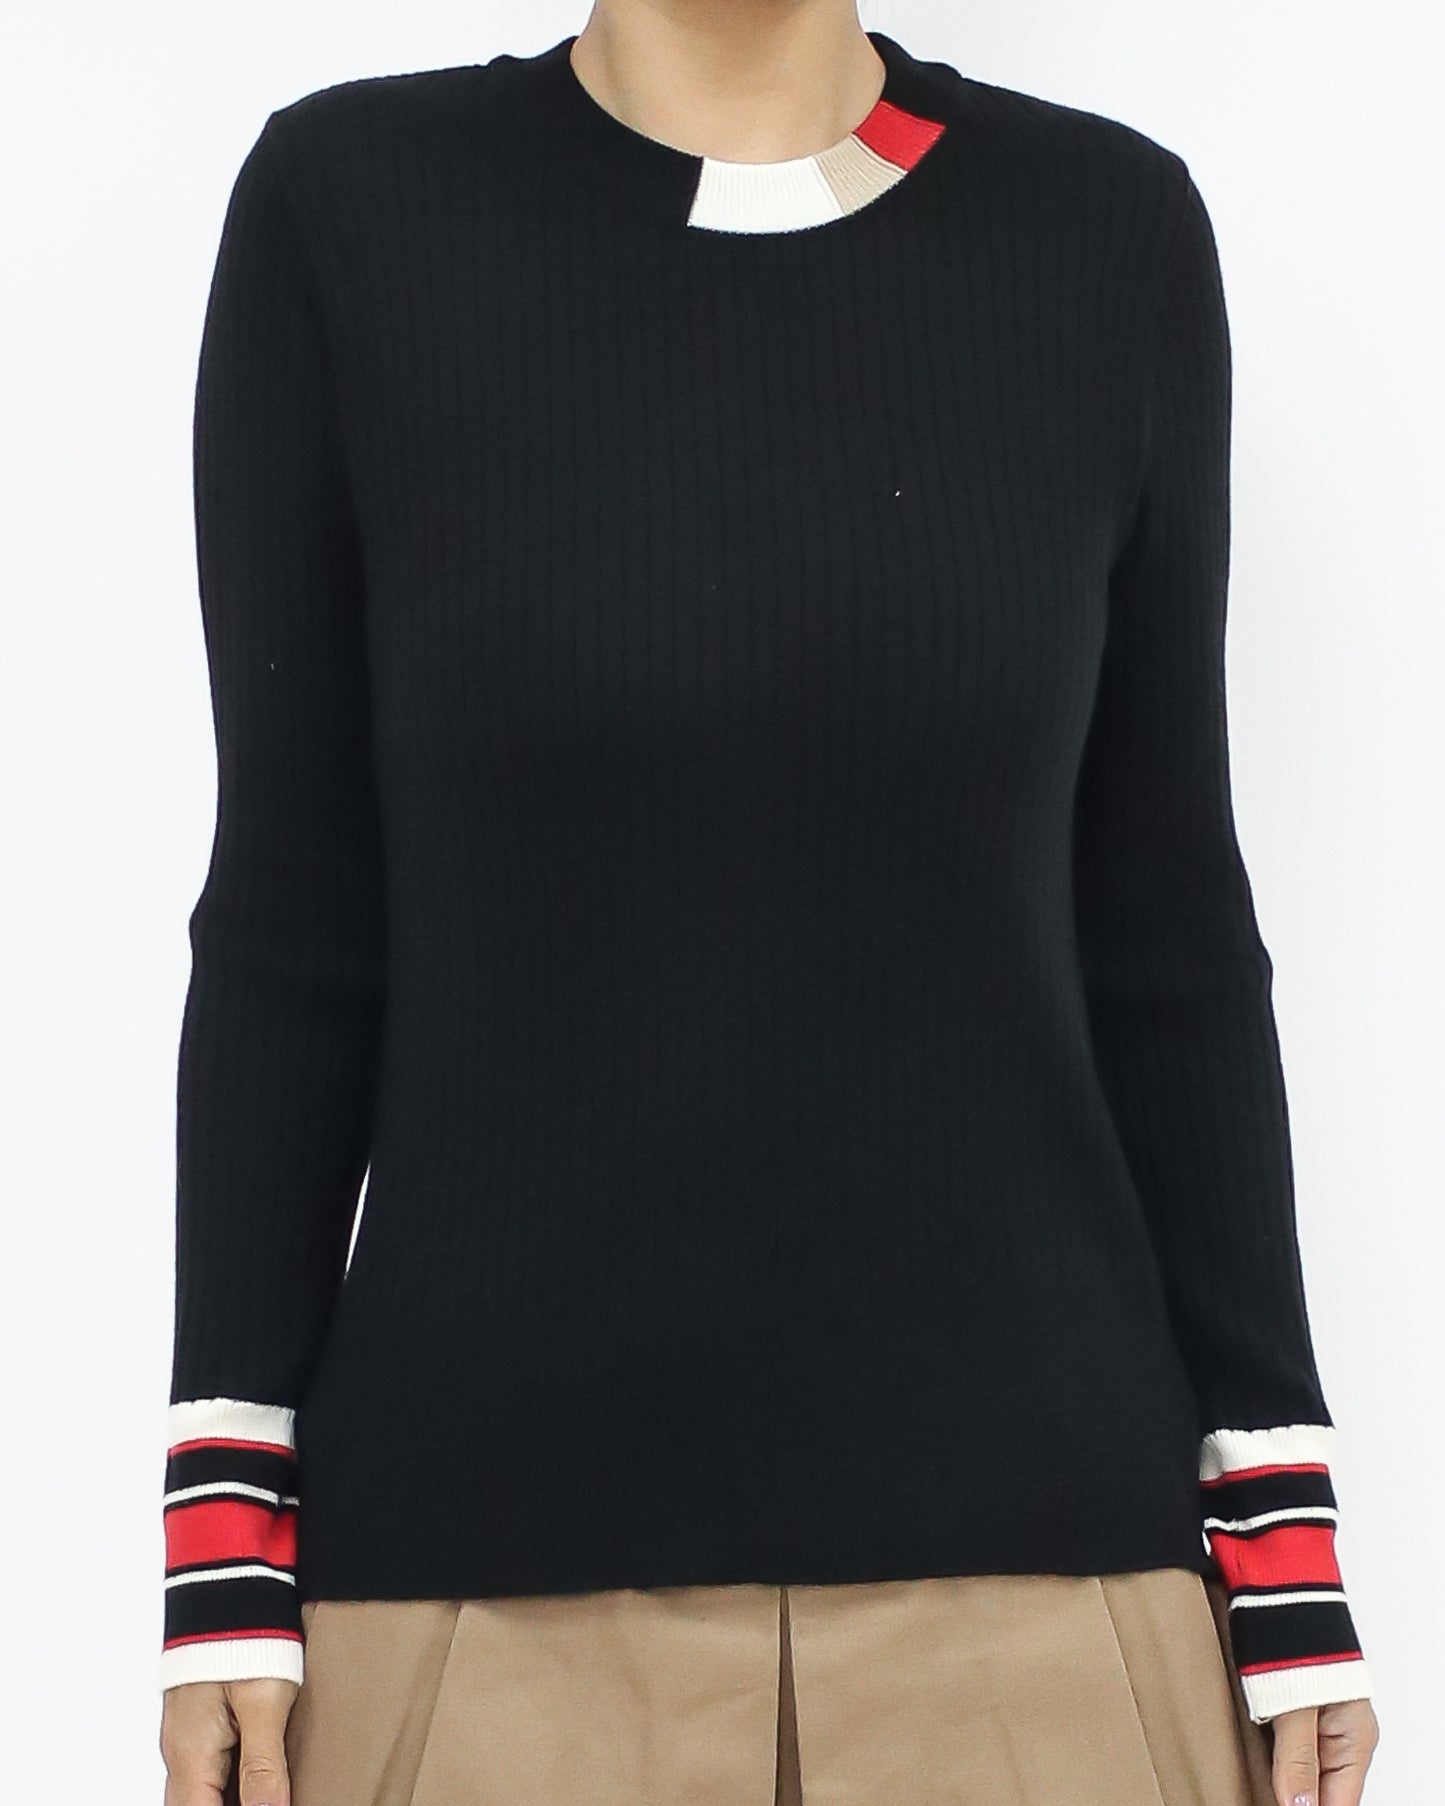 black w/ red & ivory stripes knitted top